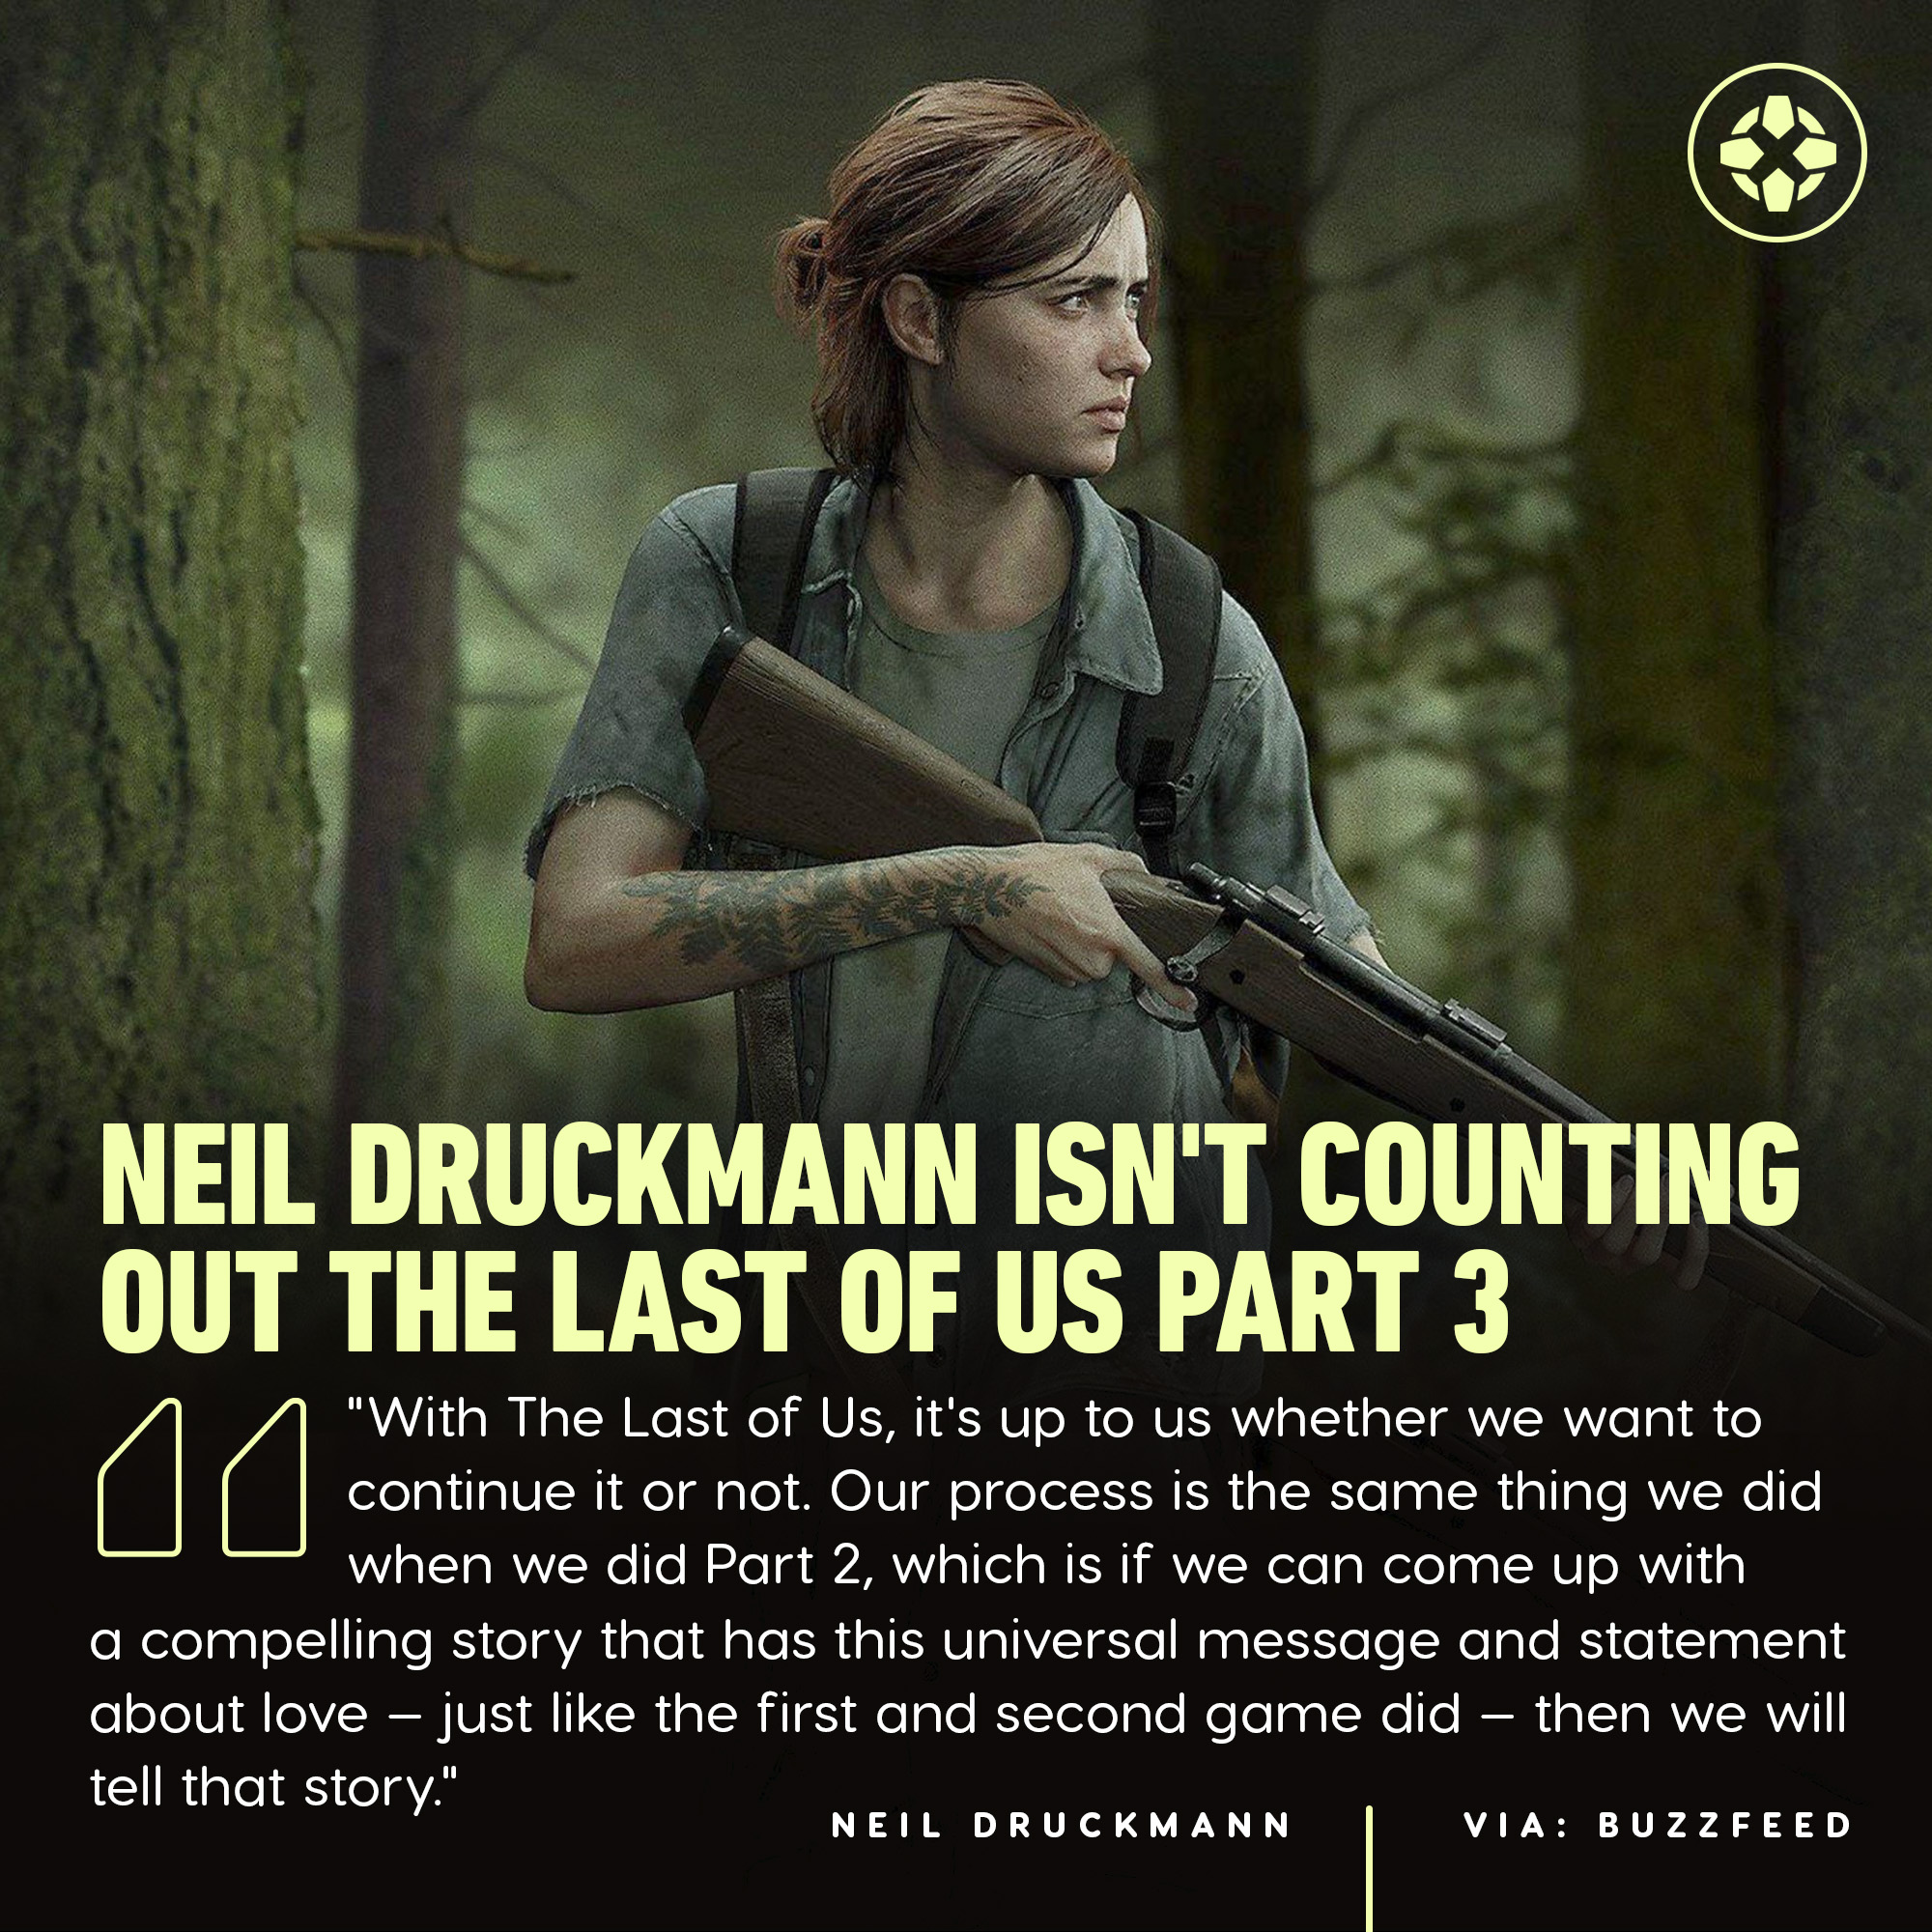 A Special Message from Neil Druckmann About The Last of Us Part II